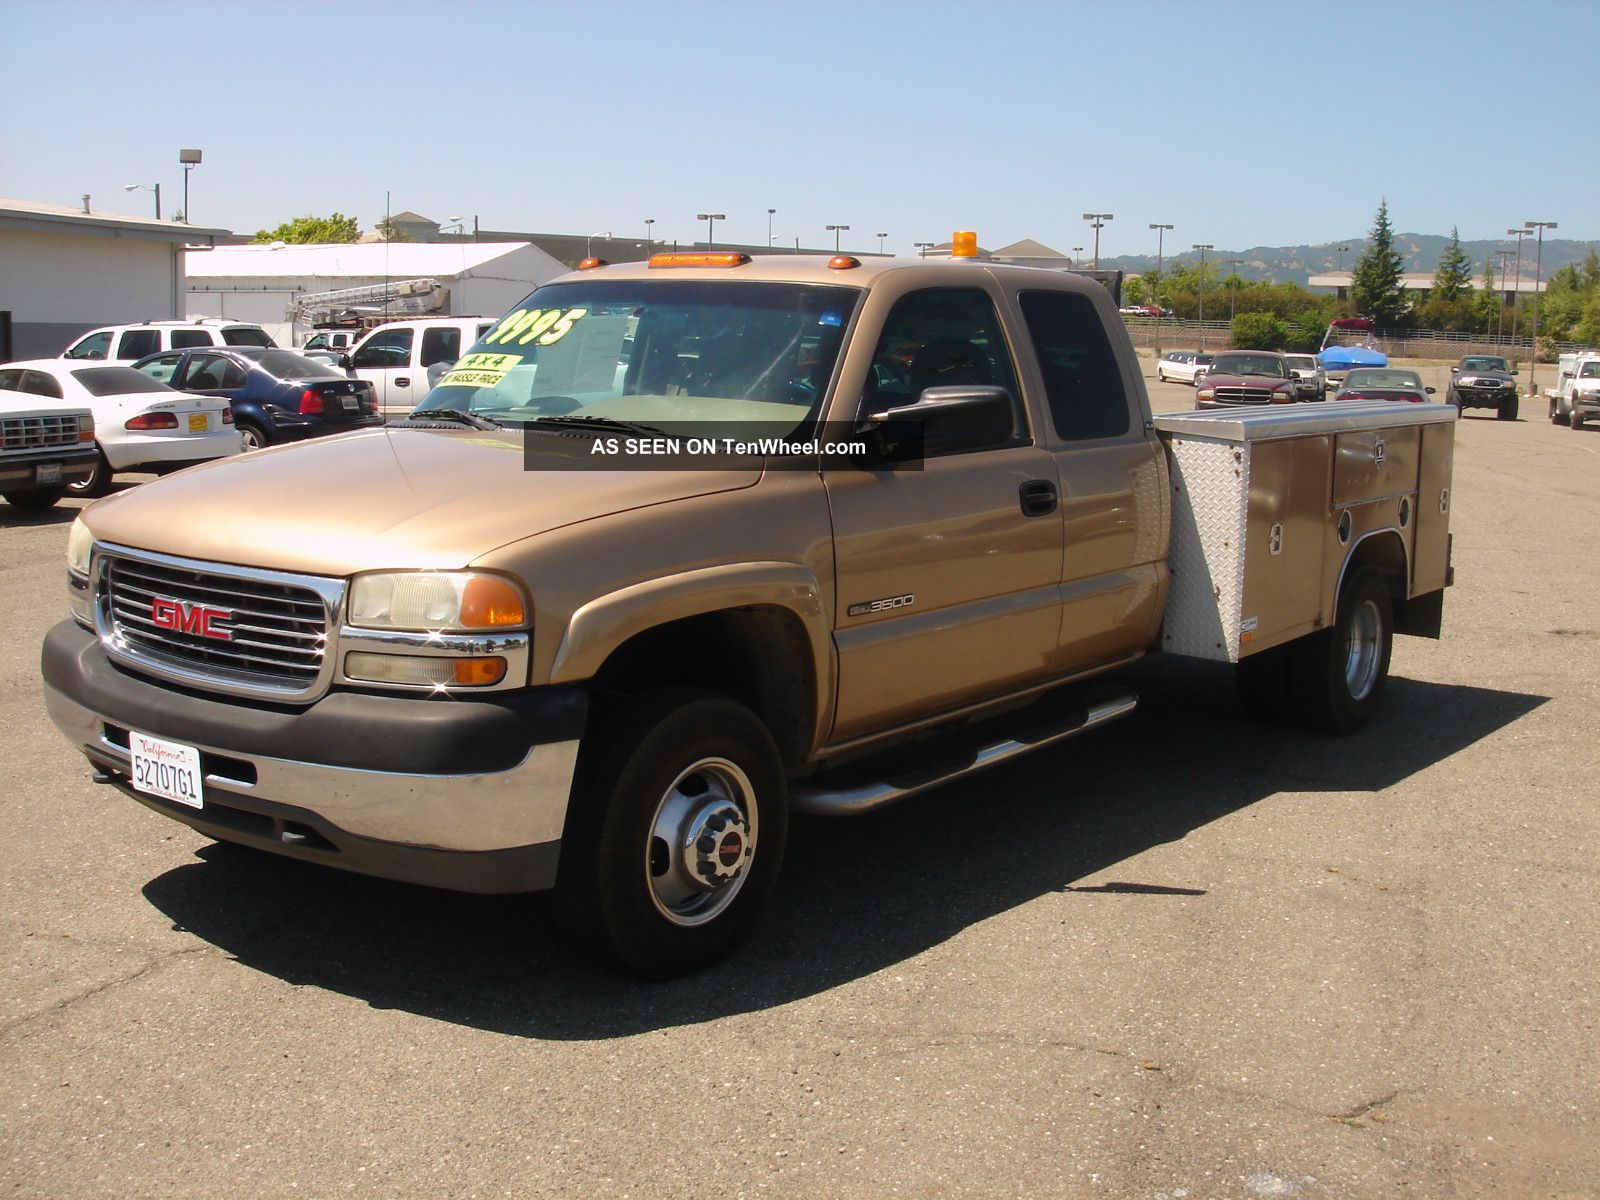 Gmc truck extended cab #4